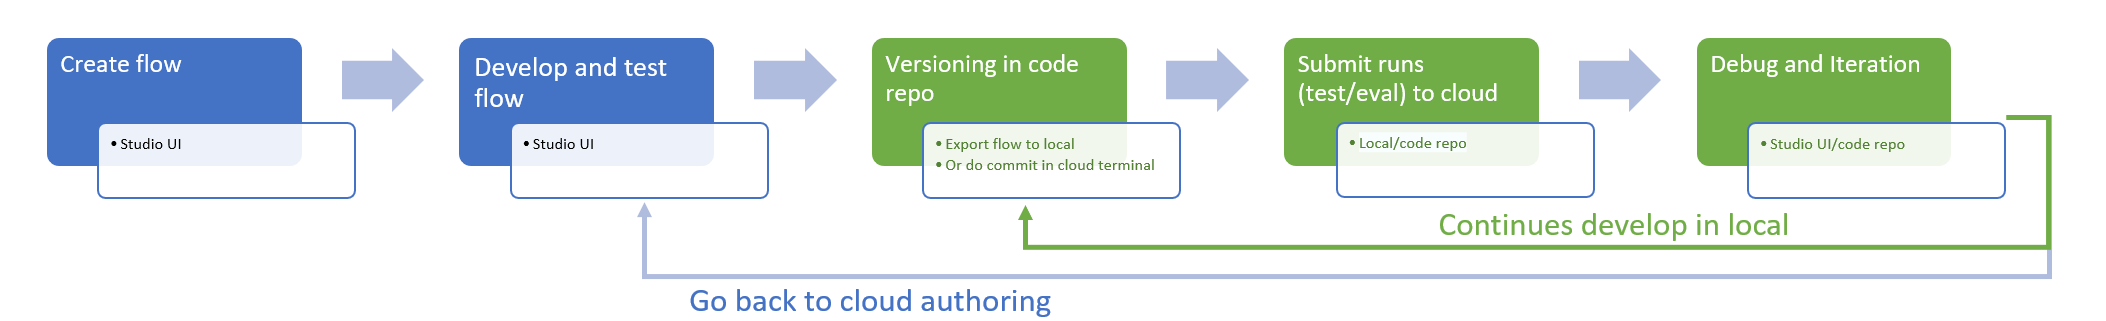 Diagram of the showing the following flow: create flow, develop and test flow, versioning in code repo, submit runs to cloud, and debut and iteration. 